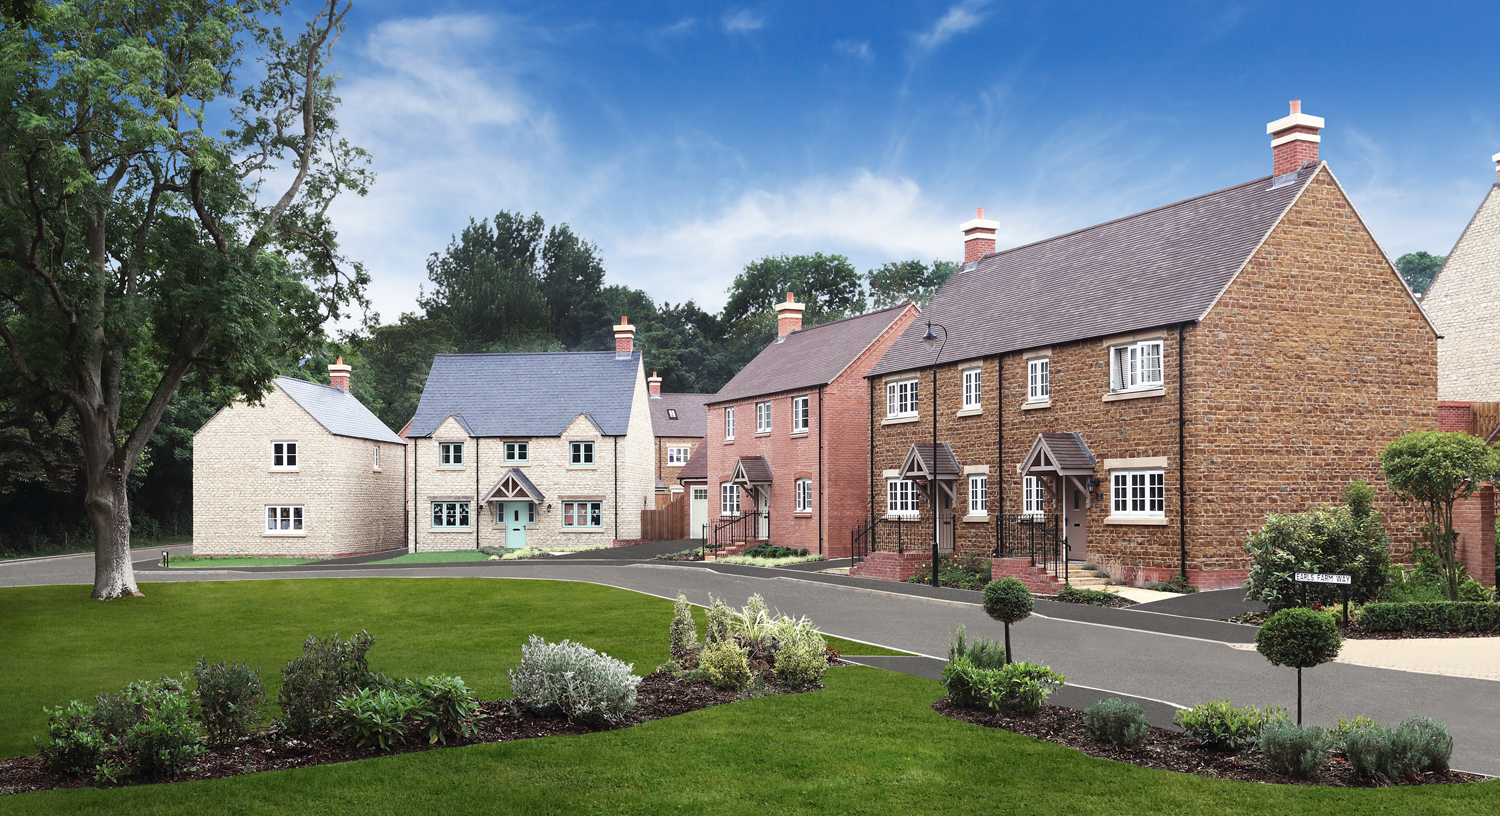 1,000 Redrow homes planned in Oxfordshire